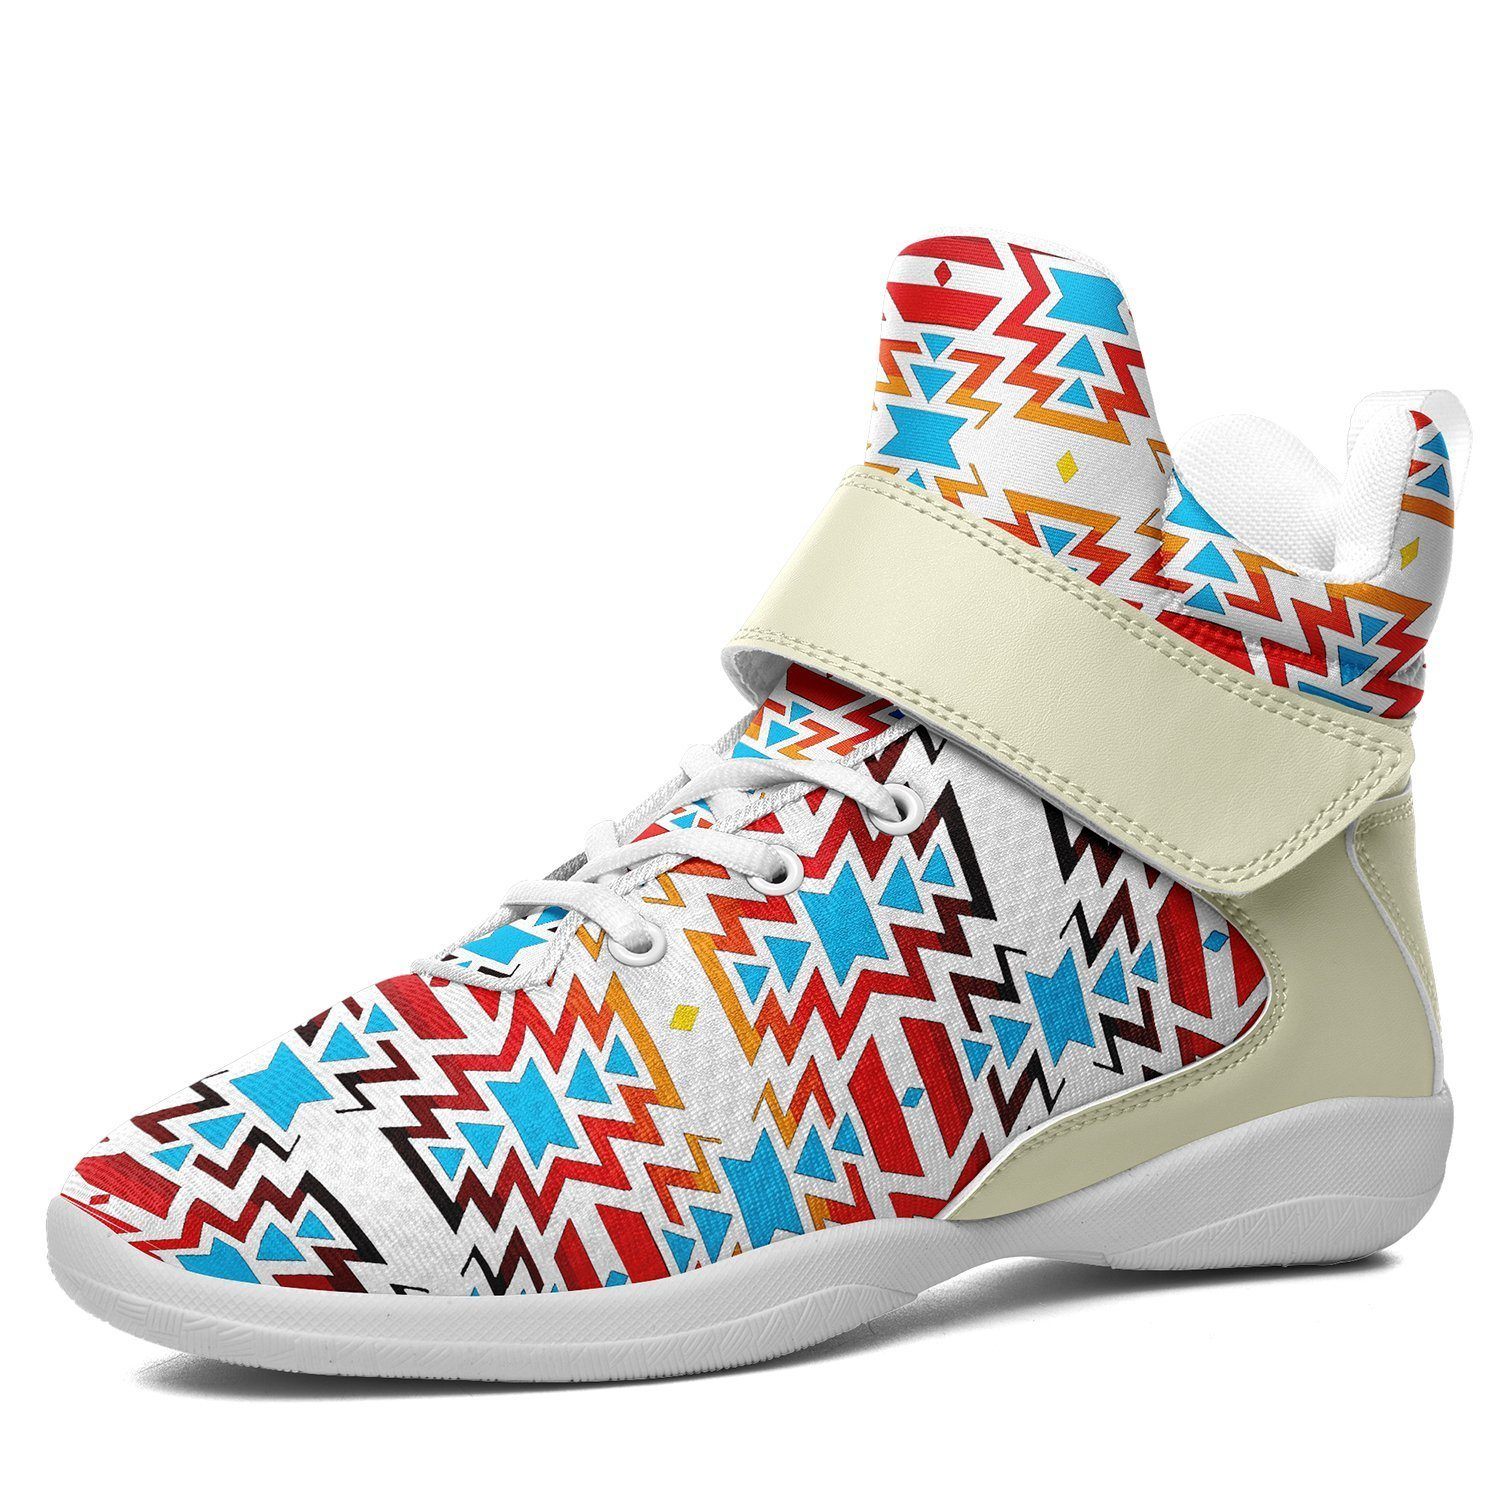 Fire Colors and Sky Kid's Ipottaa Basketball / Sport High Top Shoes 49 Dzine US Child 12.5 / EUR 30 White Sole with Cream Strap 